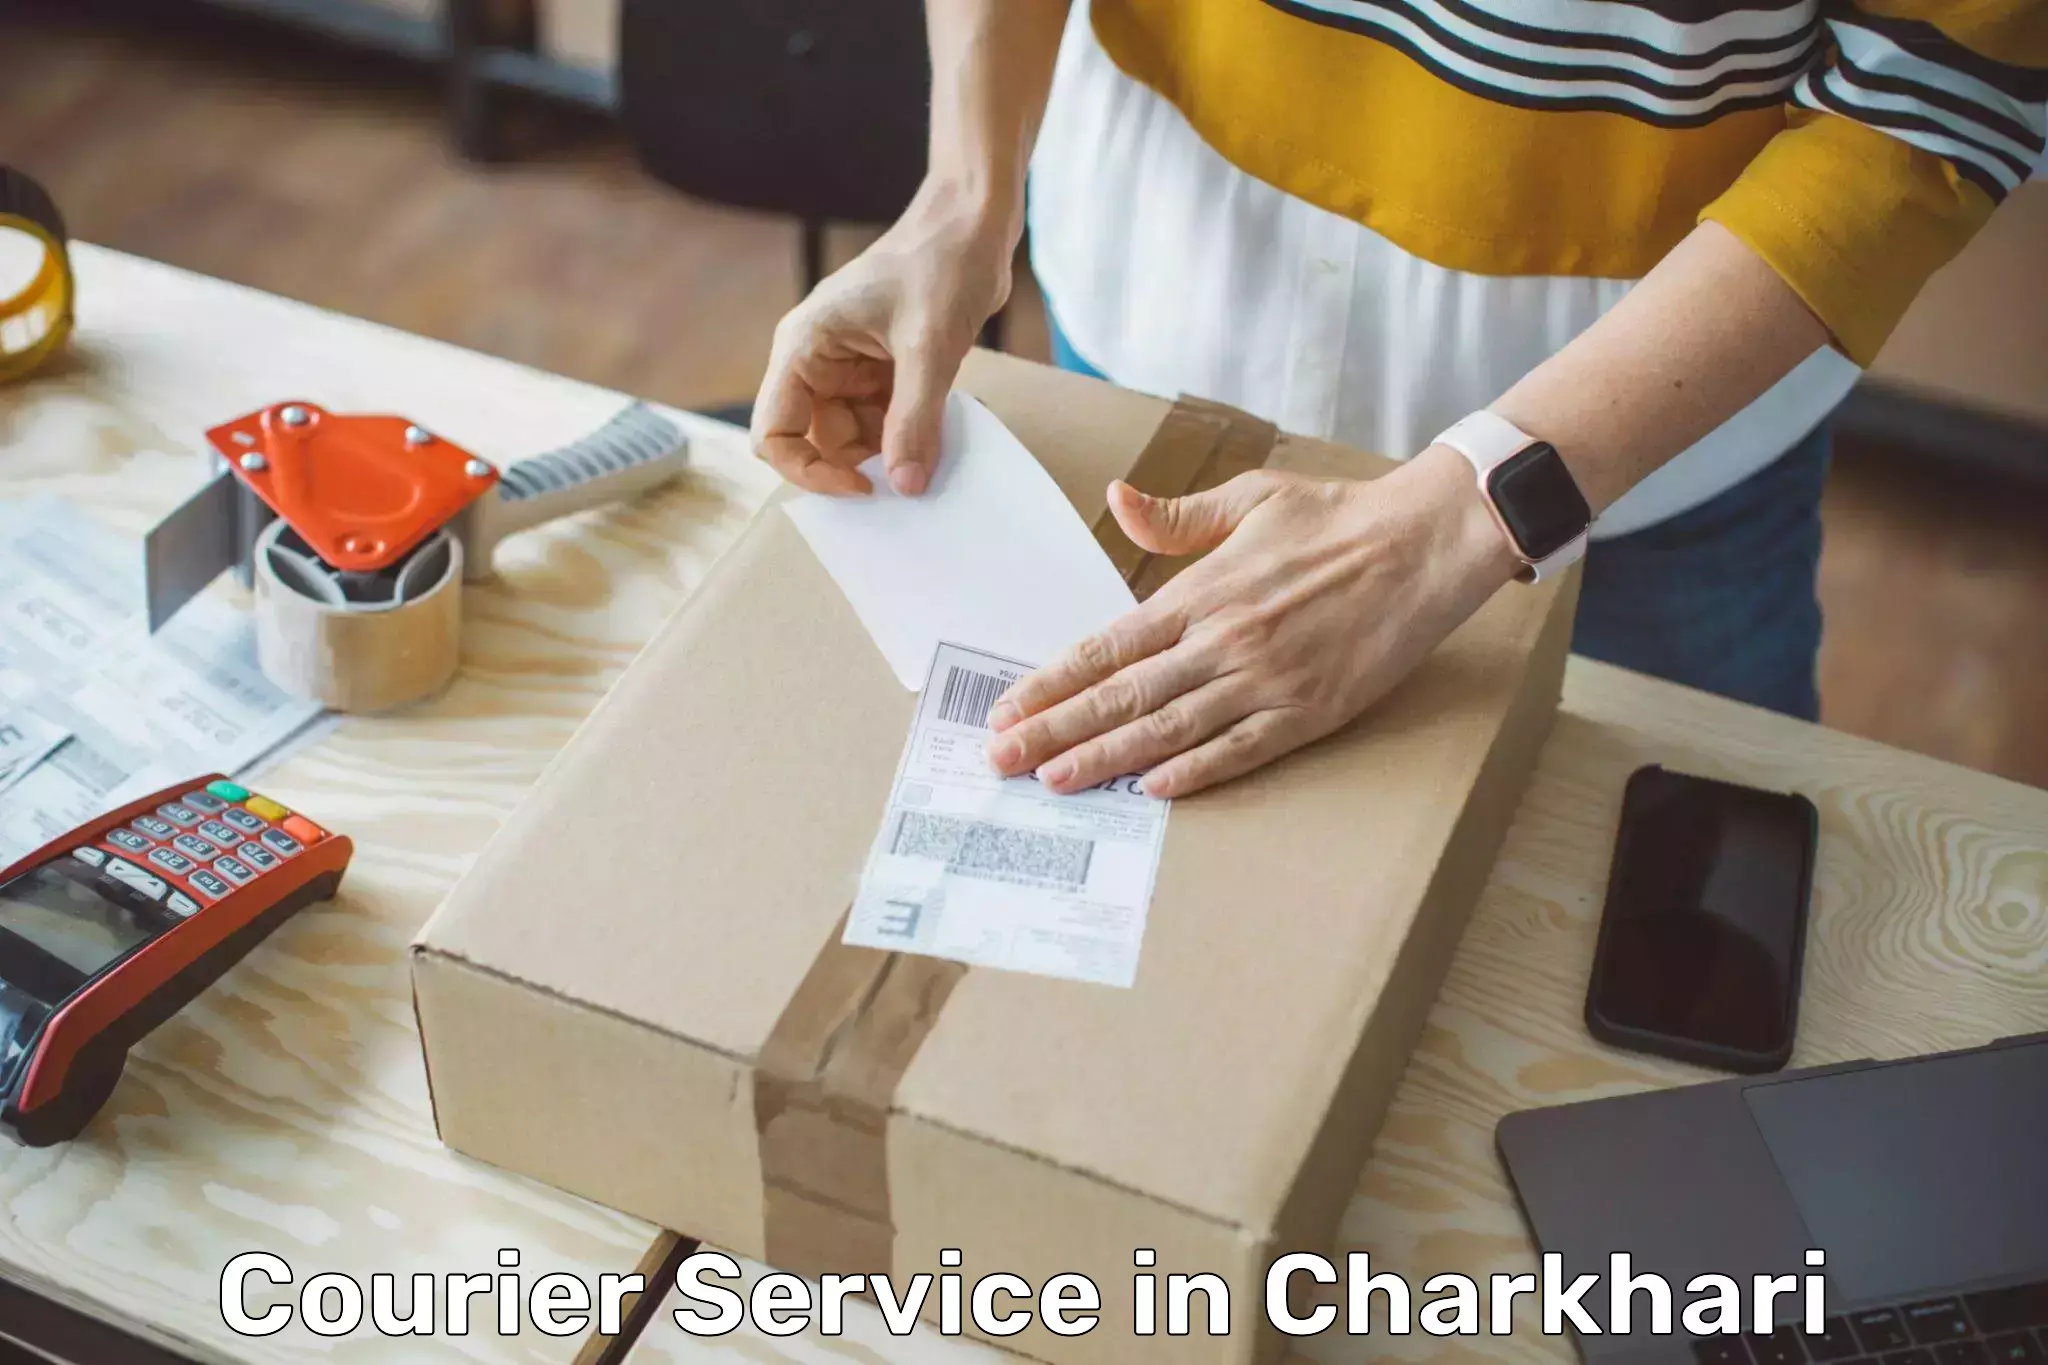 Small parcel delivery in Charkhari